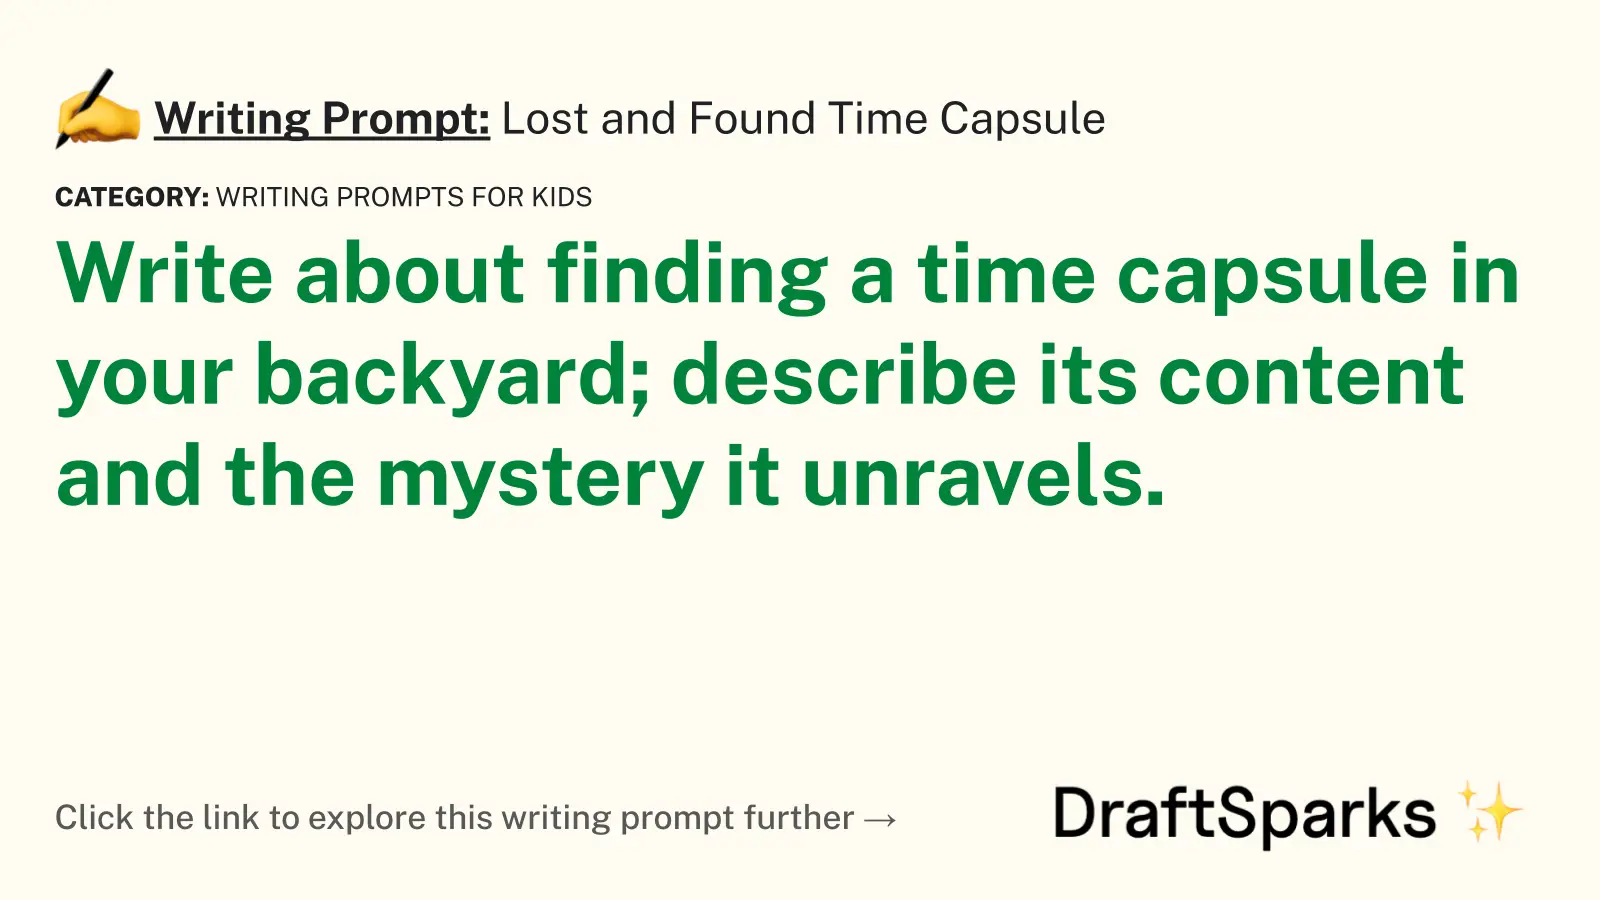 Lost and Found Time Capsule